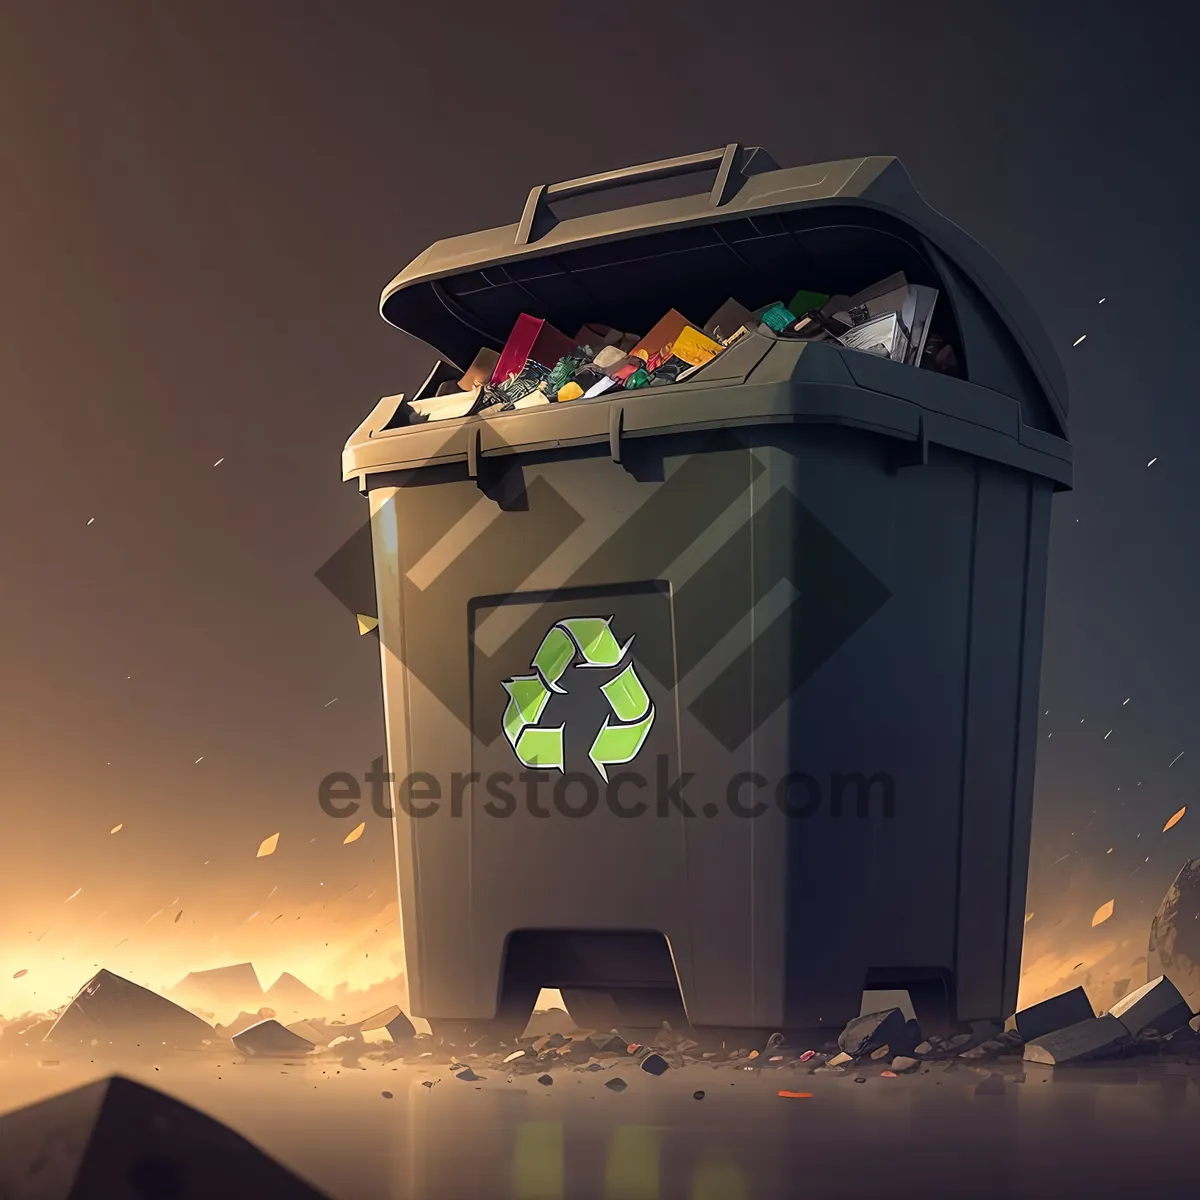 Picture of Urban Waste Management Solution: Ashcan Bin Container in Building